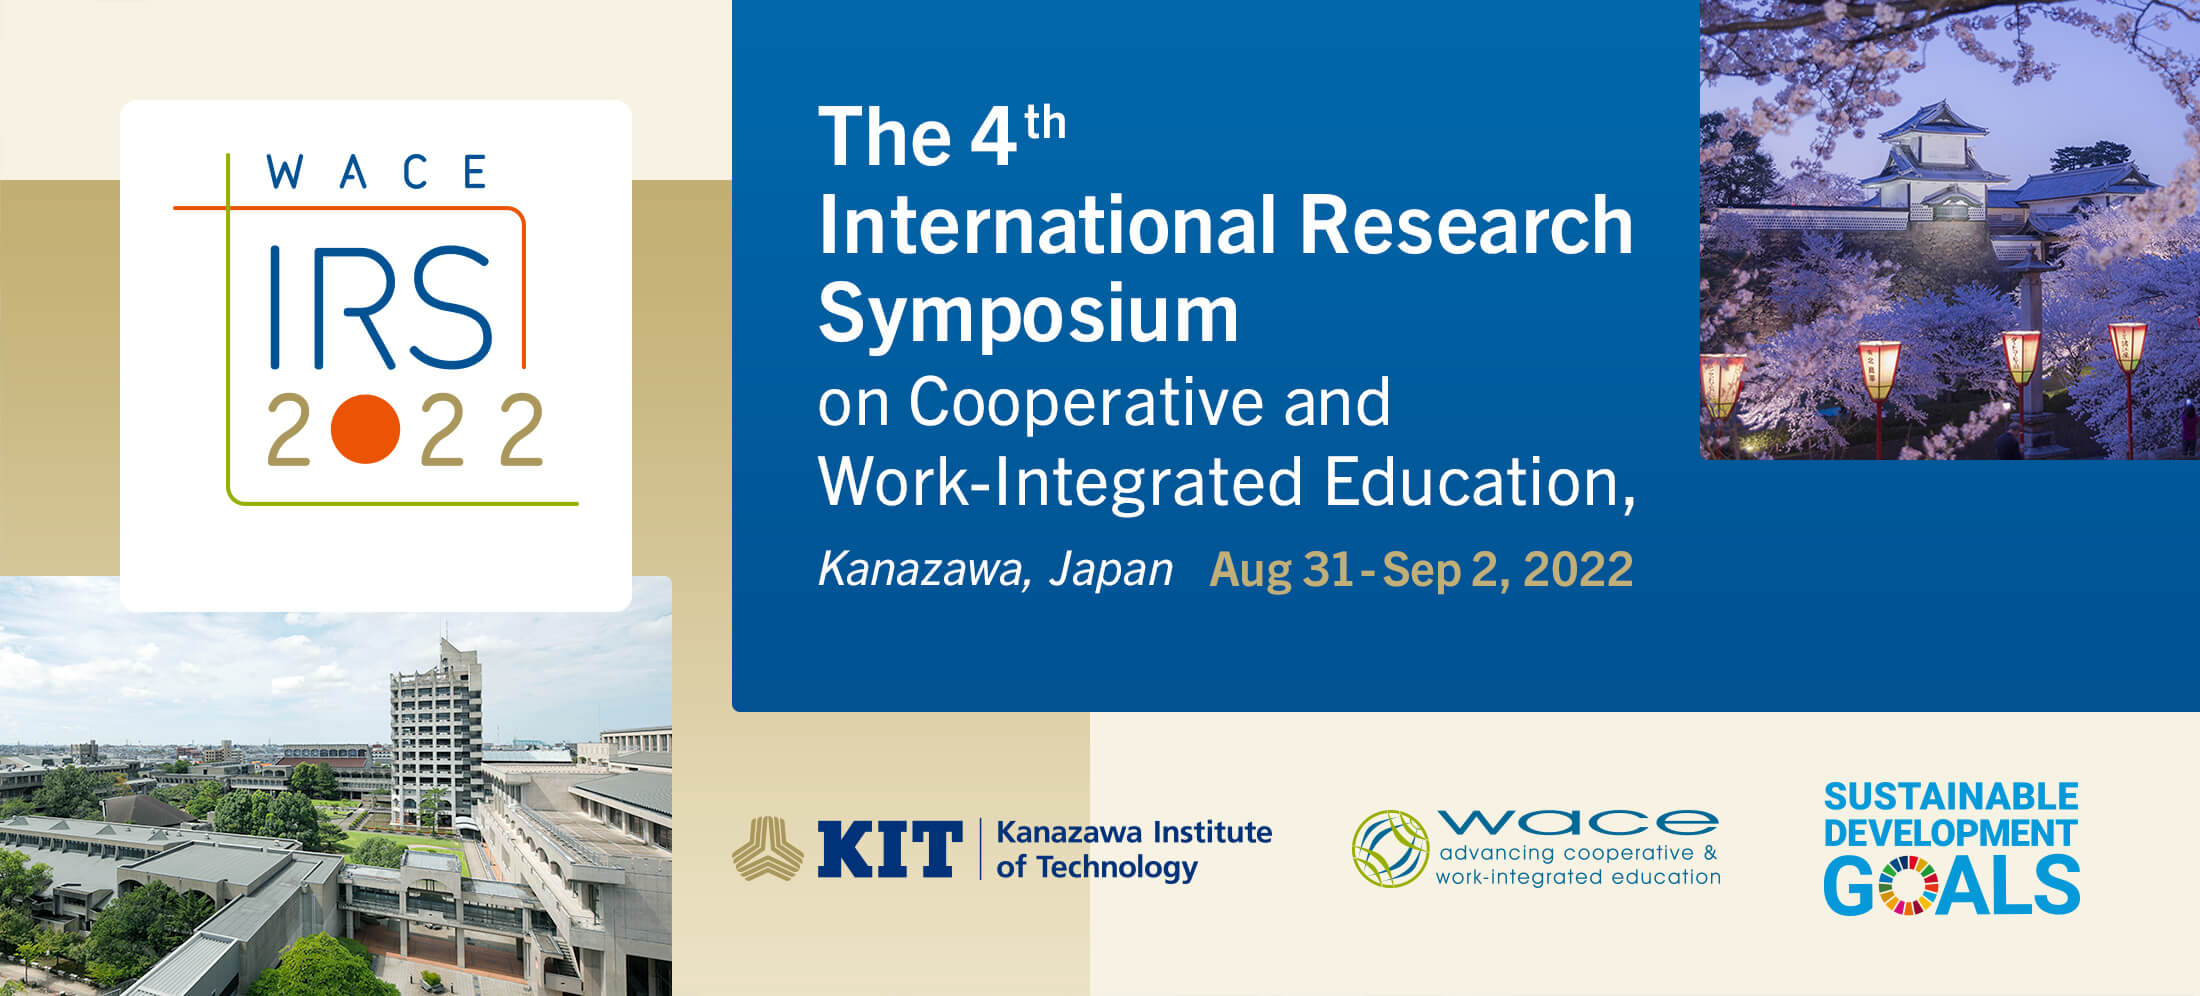 WACE IRS 2022. The 4th International Research Symposium on Cooperative and Work-Integrated Education,Kanazawa, Japan. Aug 31-Sep 2, 2022